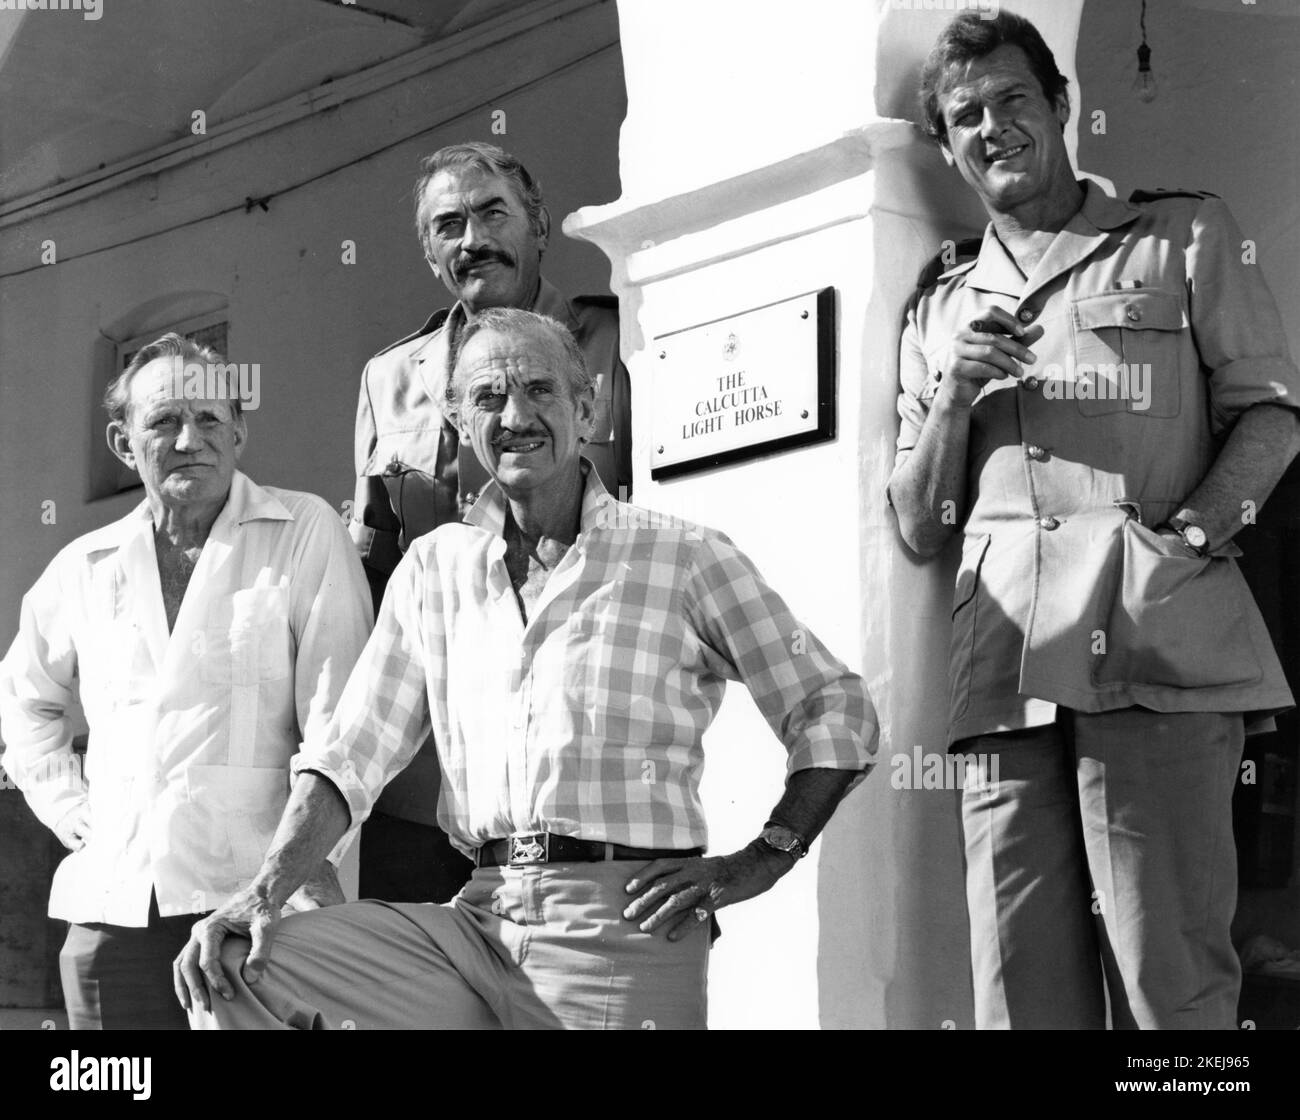 TREVOR HOWARD GREGORY PECK DAVID NIVEN and ROGER MOORE on location in India candid group portrait during filming of THE SEA WOLVES 1980 director ANDREW V. McLAGLEN book Boarding Party by James Leasor screenplay Reginald Rose producer Euan Lloyd Switzerland - UK - USA co-production Lorimar Productions / Richmond Light Horse Productions / Varius Entertainment Trading A.G. / Rank Film Distributors Stock Photo